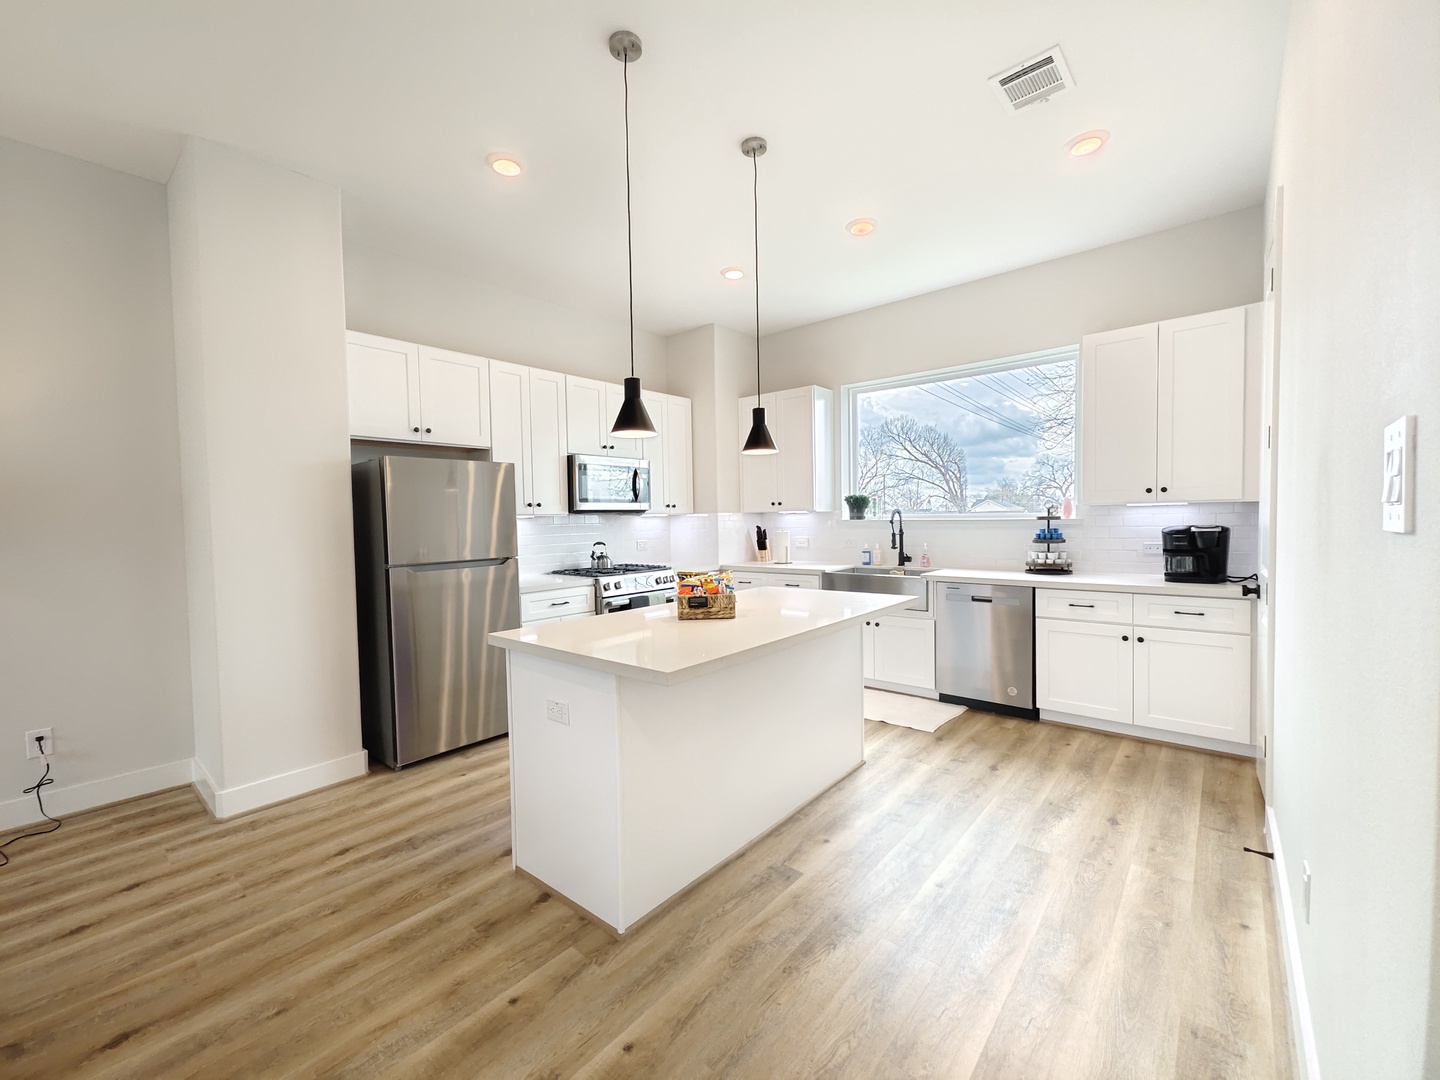 The bright, spacious kitchen offers all the comforts of home